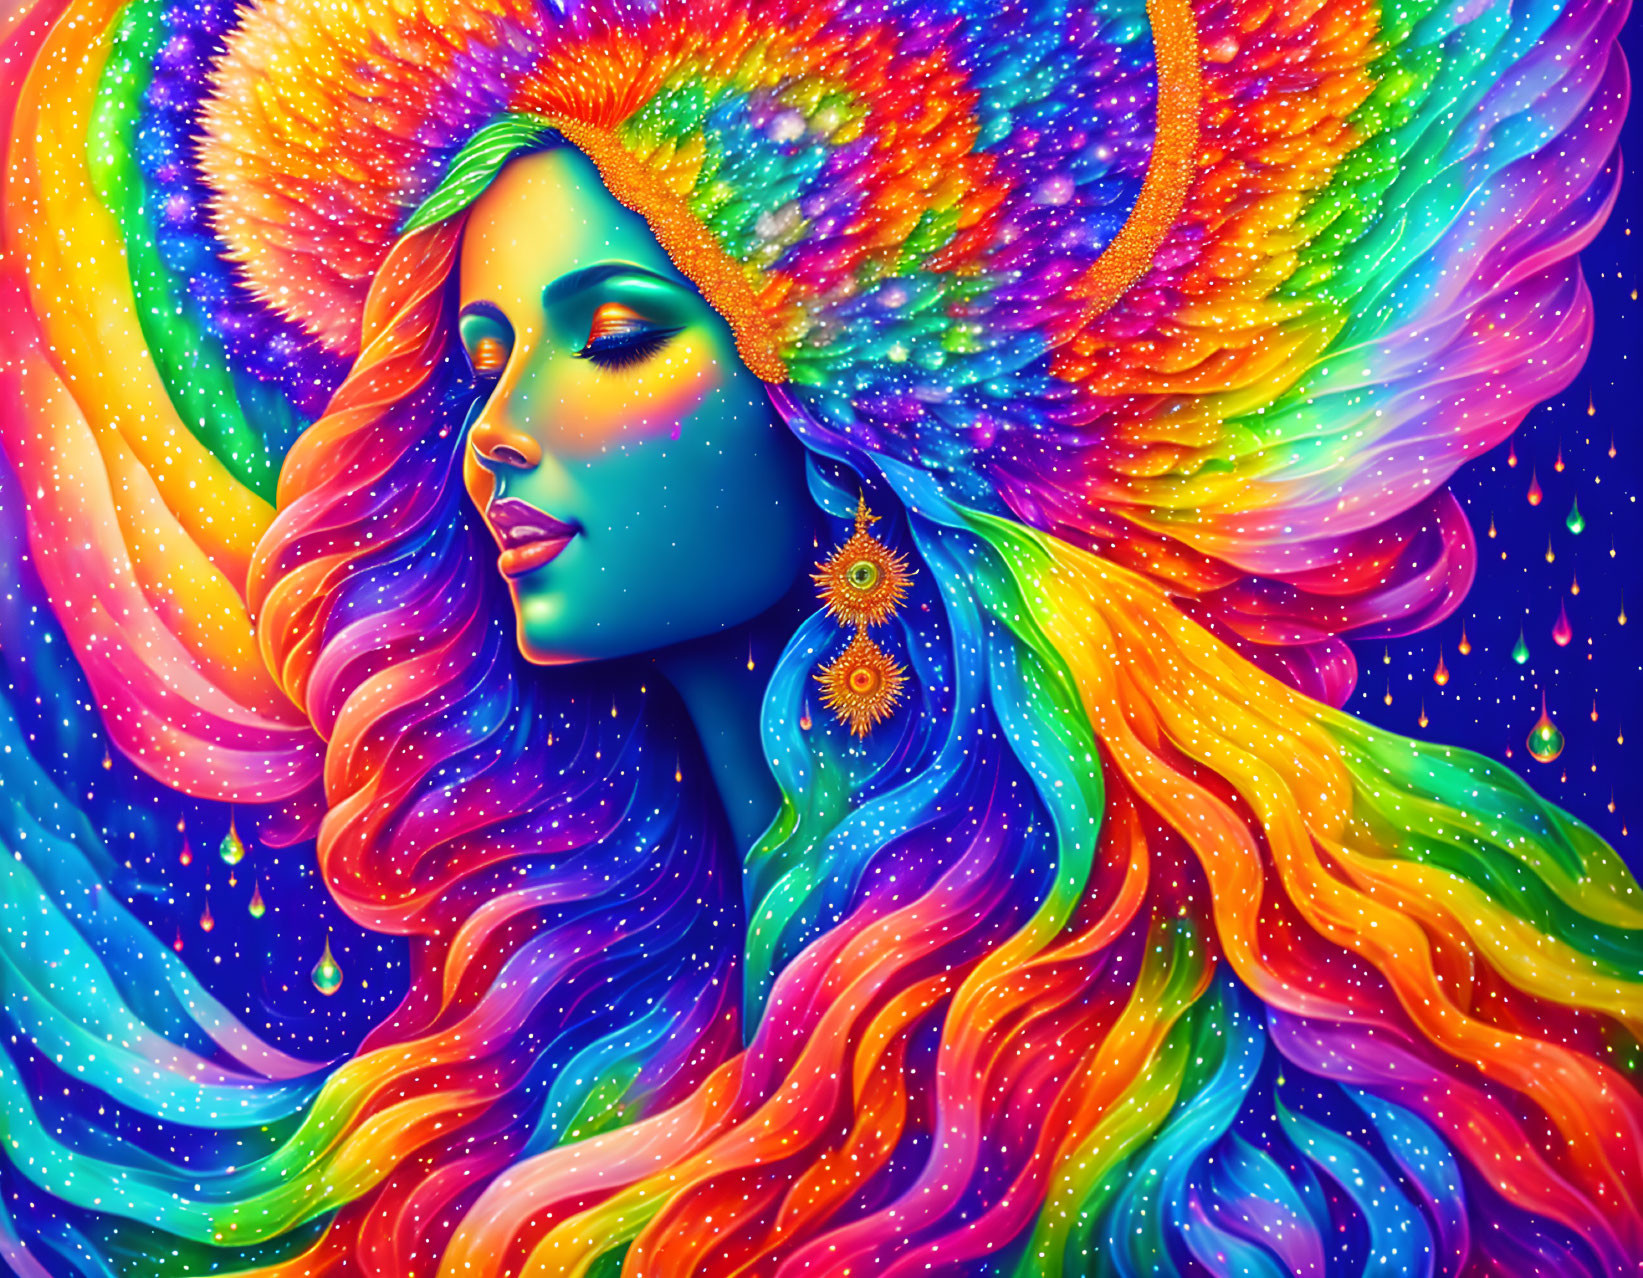 Colorful digital art: Woman with flowing hair in cosmic backdrop